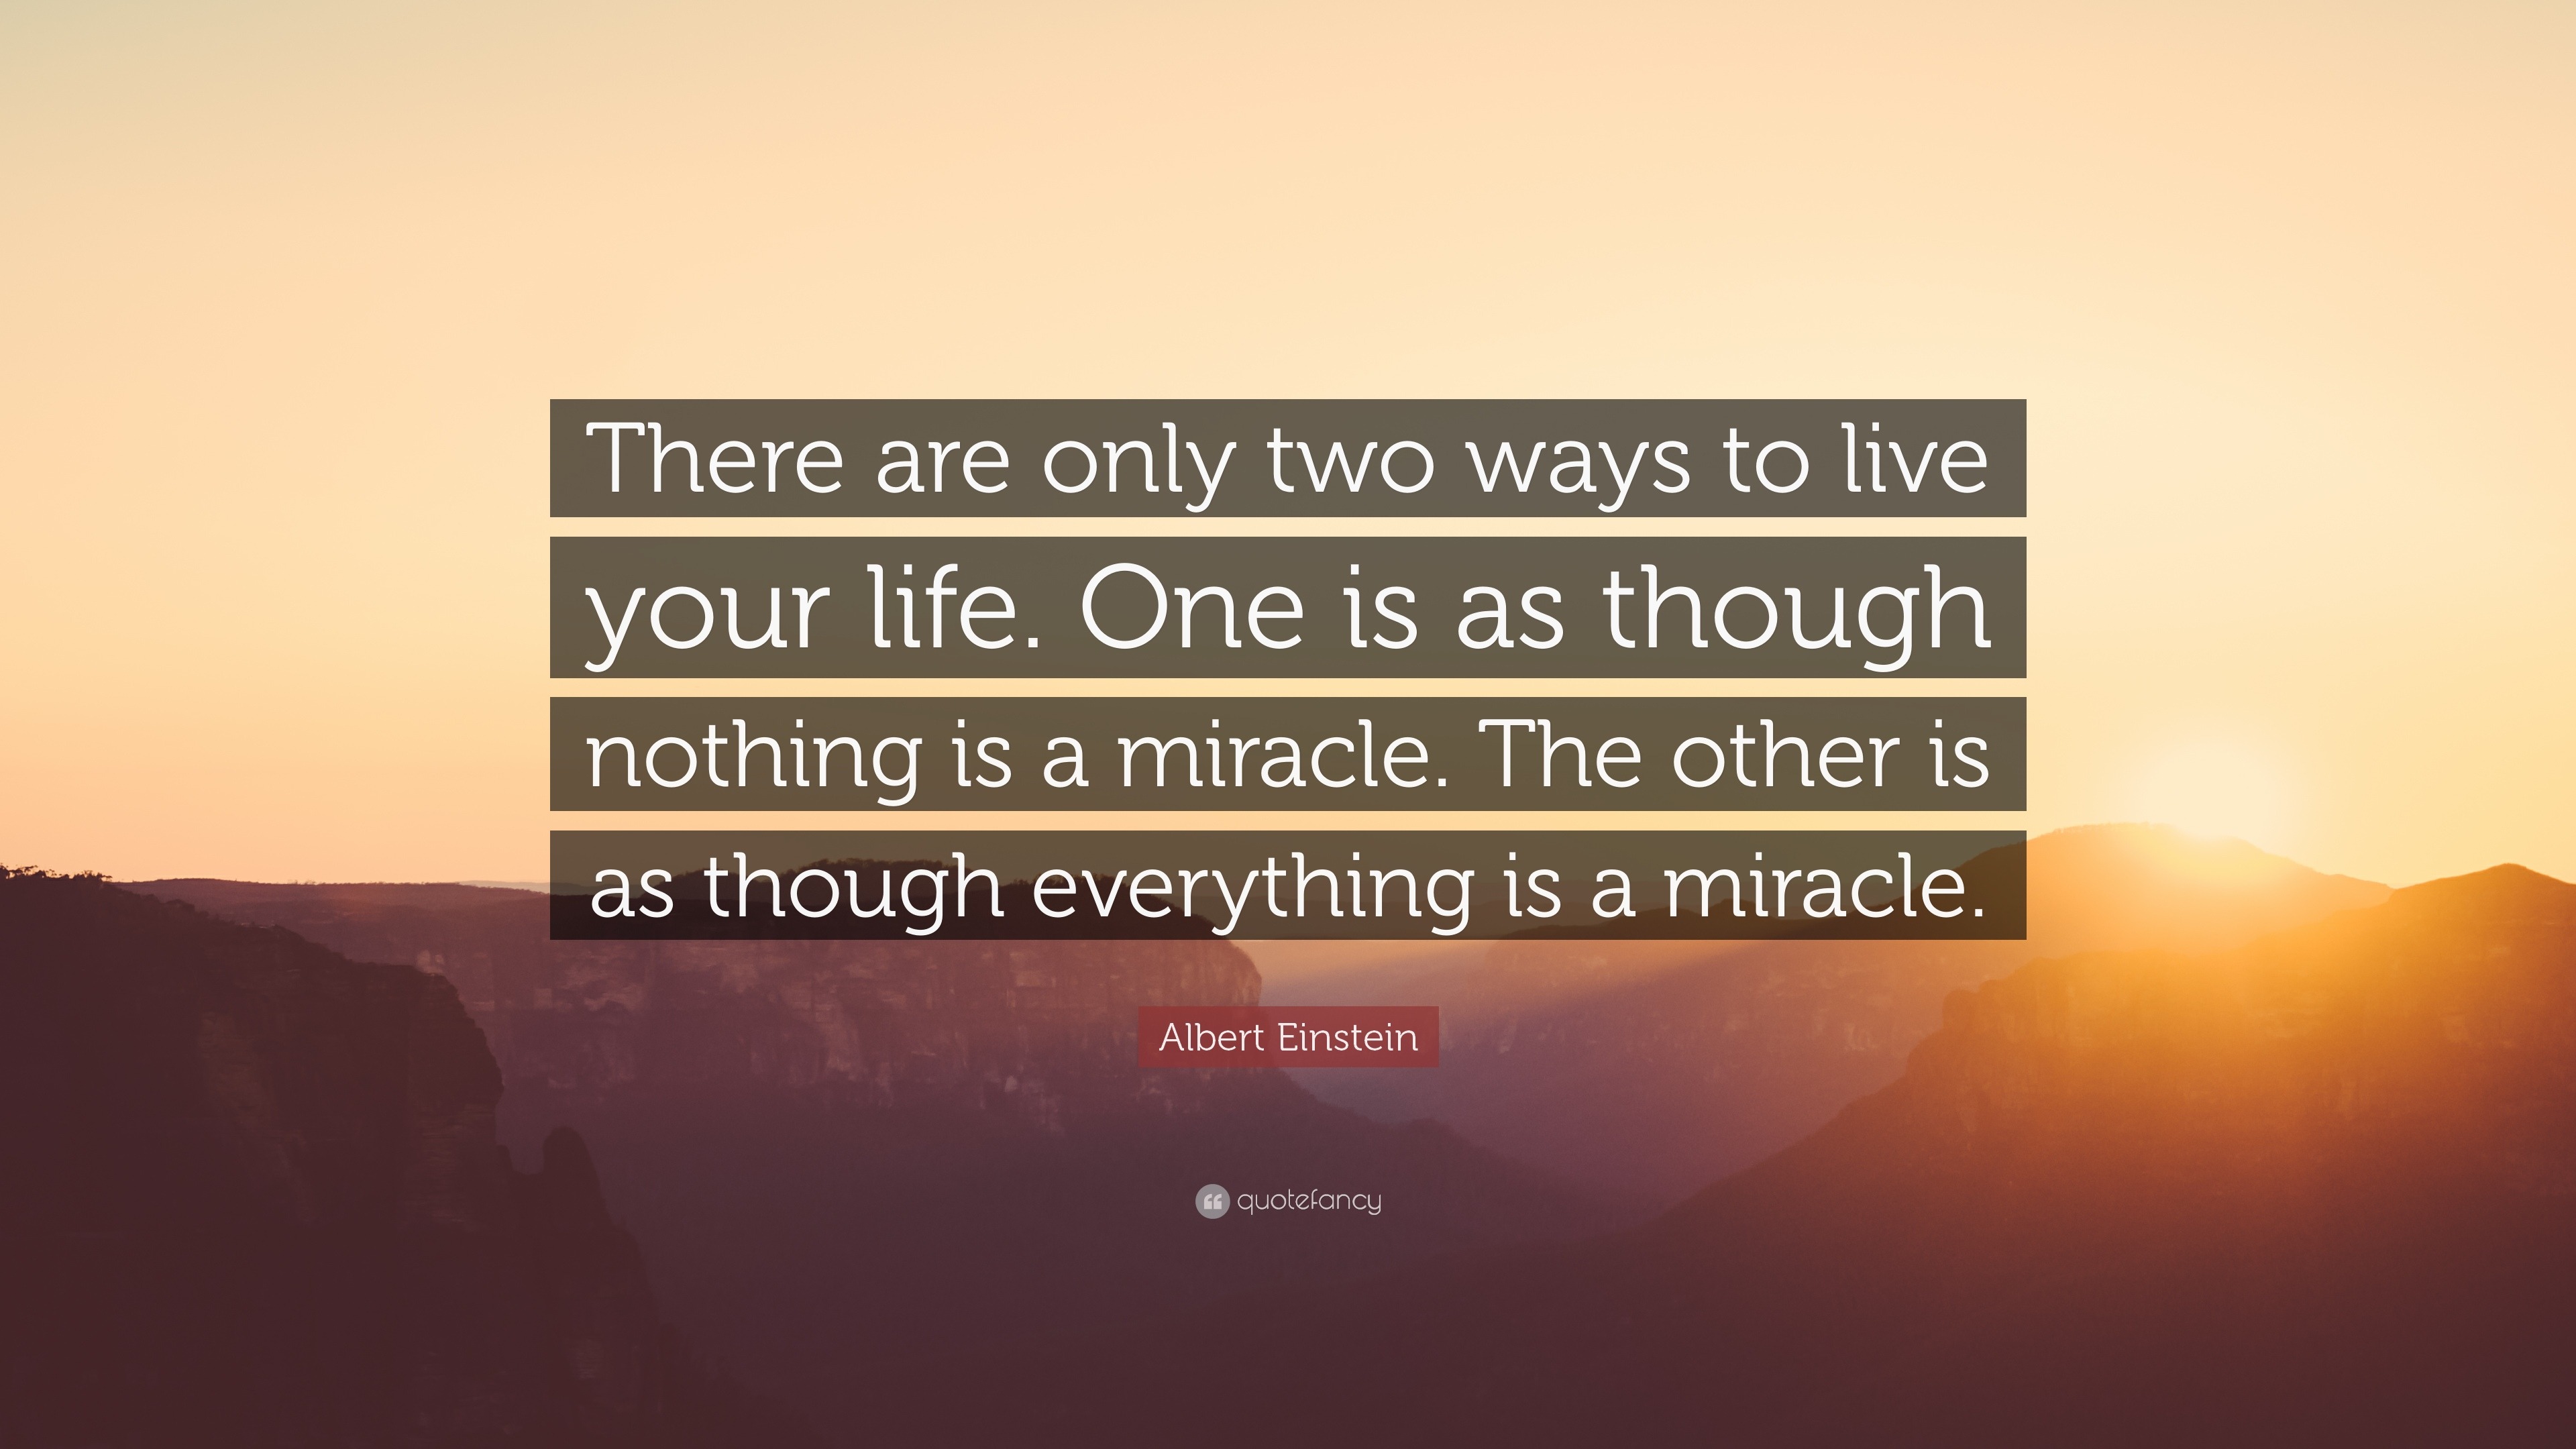 Albert Einstein Quote: “There are only two ways to live your life. One ...